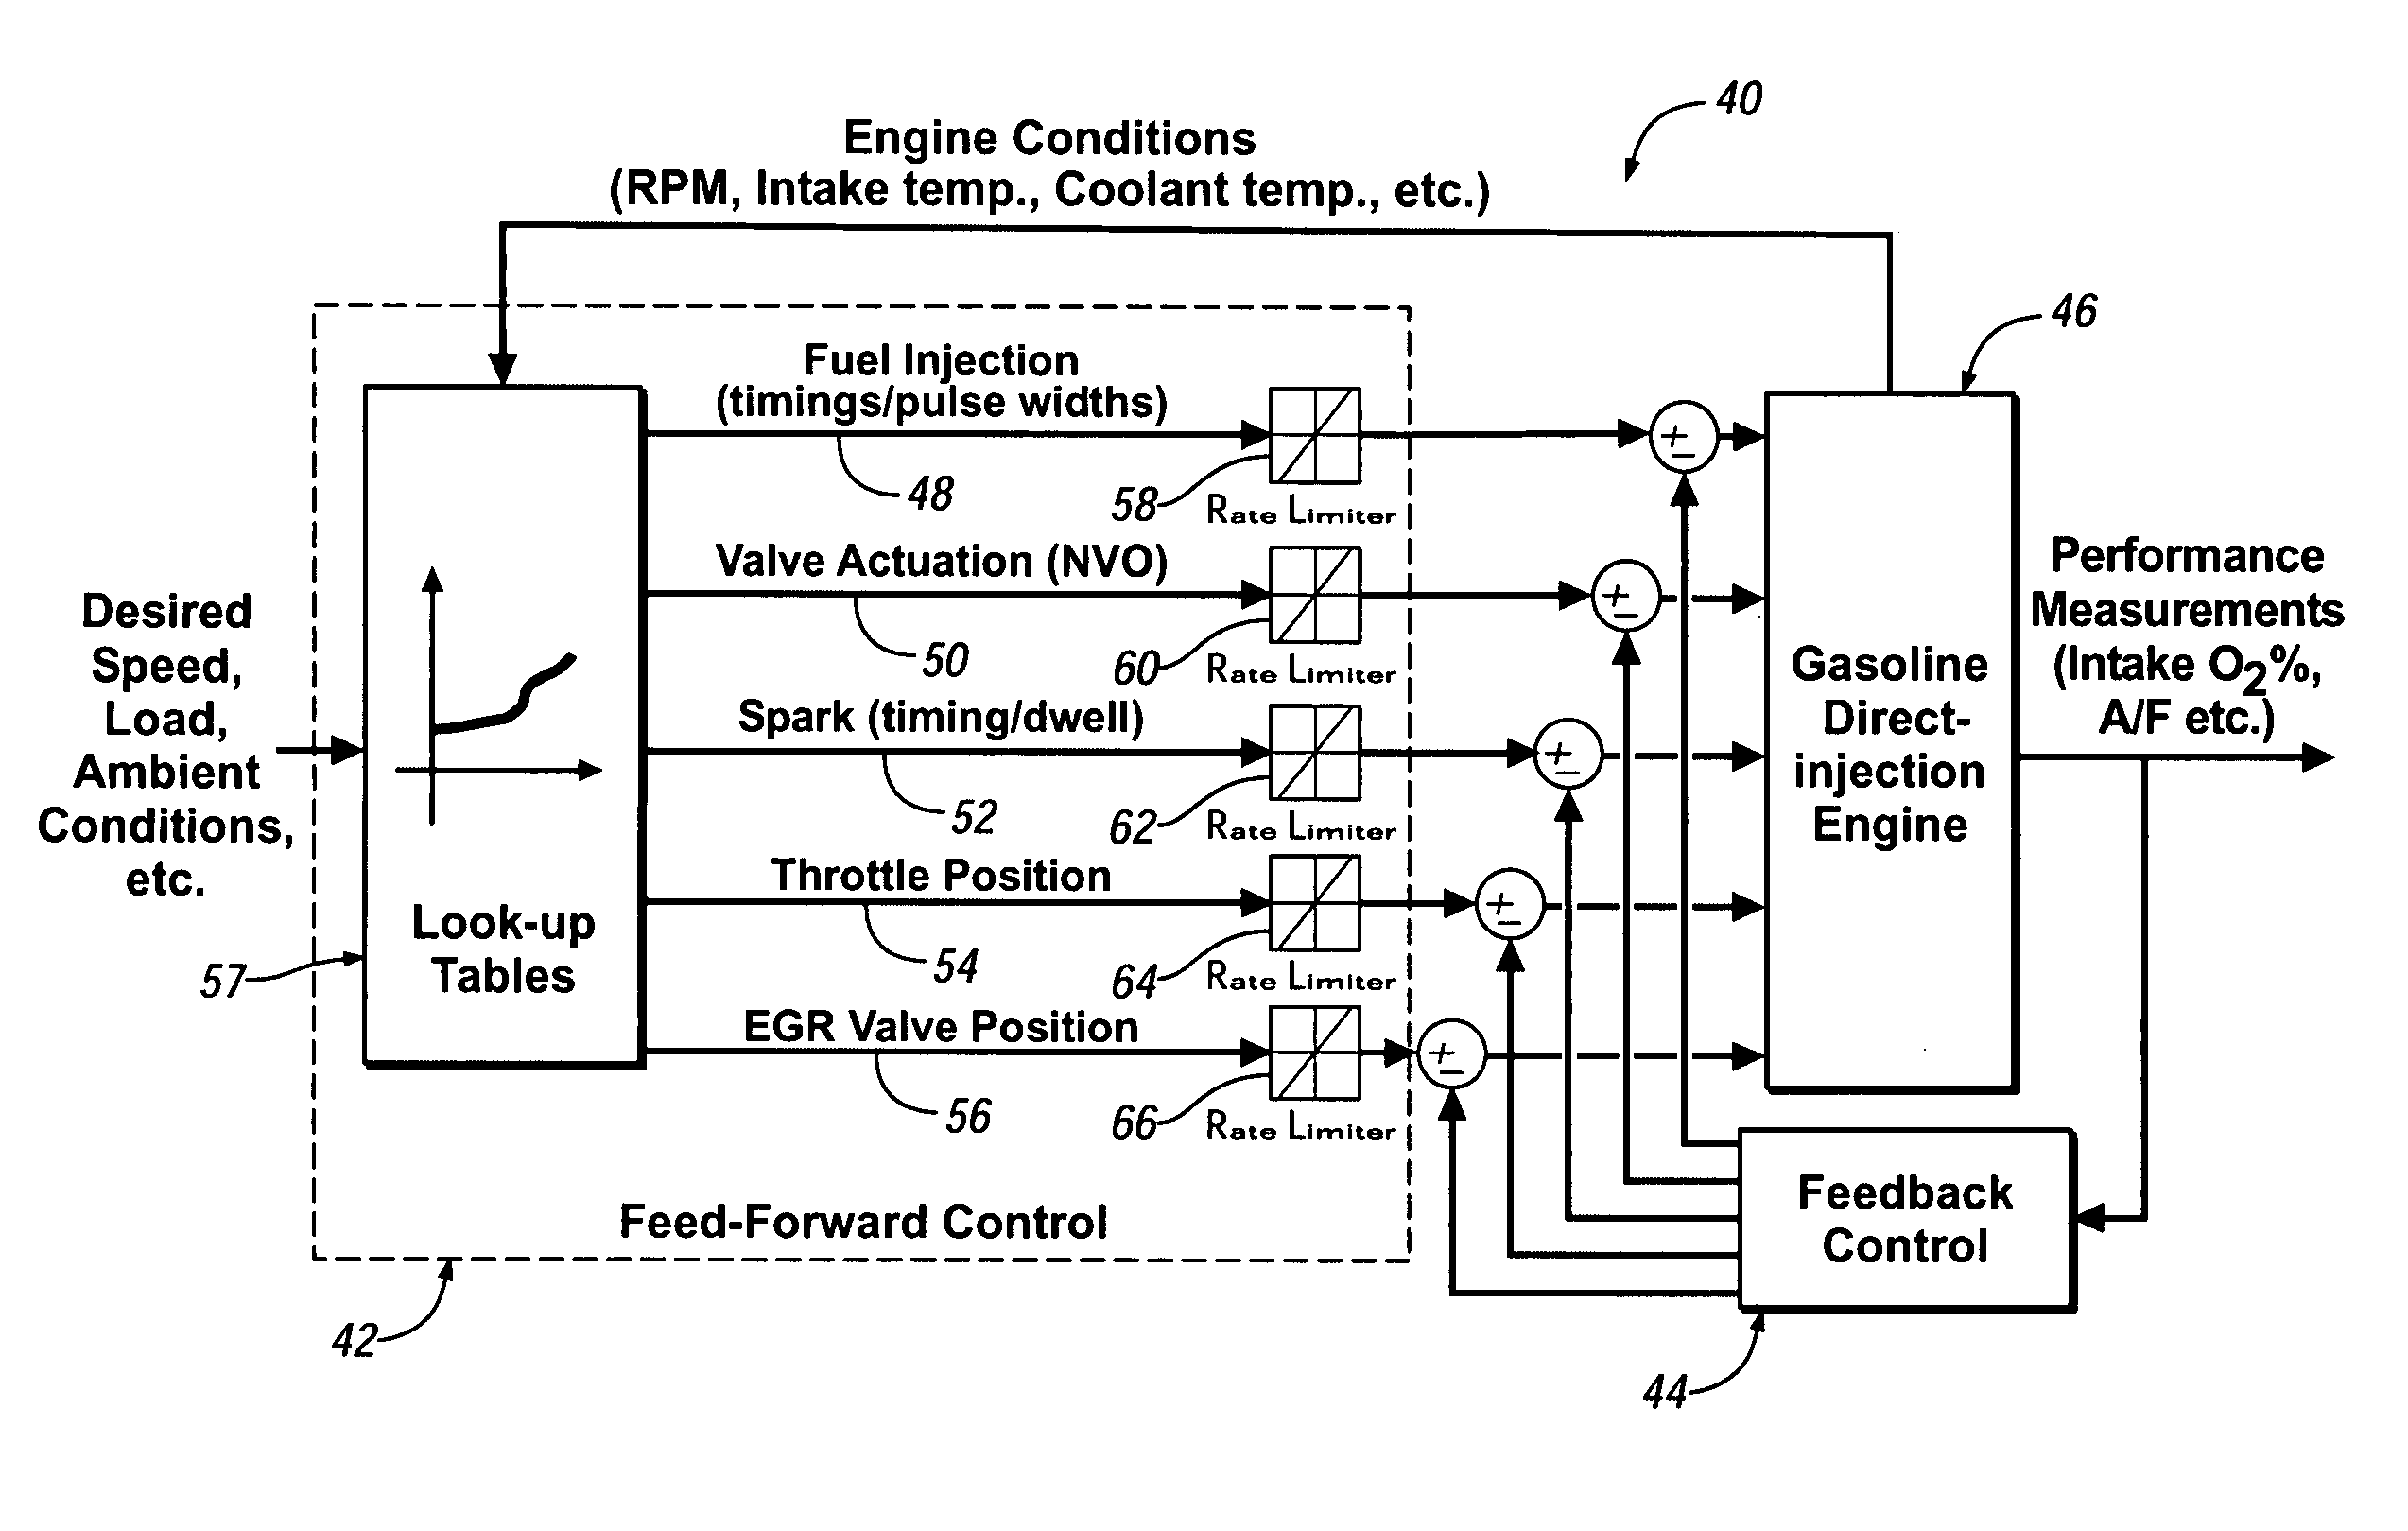 Speed transient control methods for direct-injection engines with controlled auto-ignition combustion